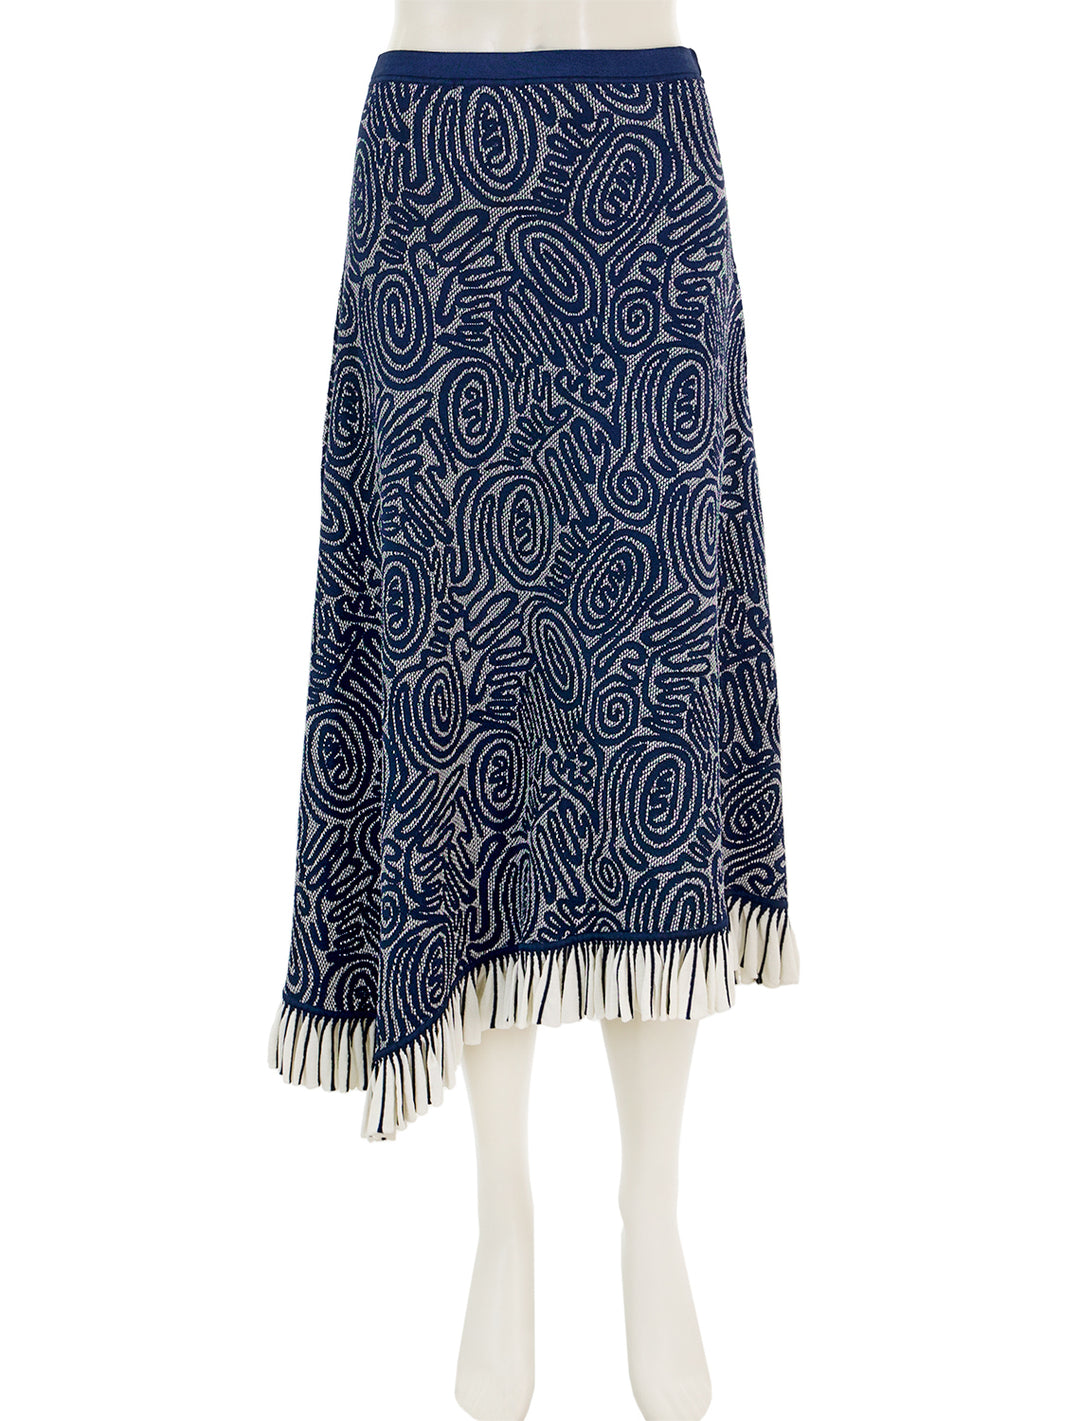 Front view of Ulla Johnson's josephine skirt in ink.